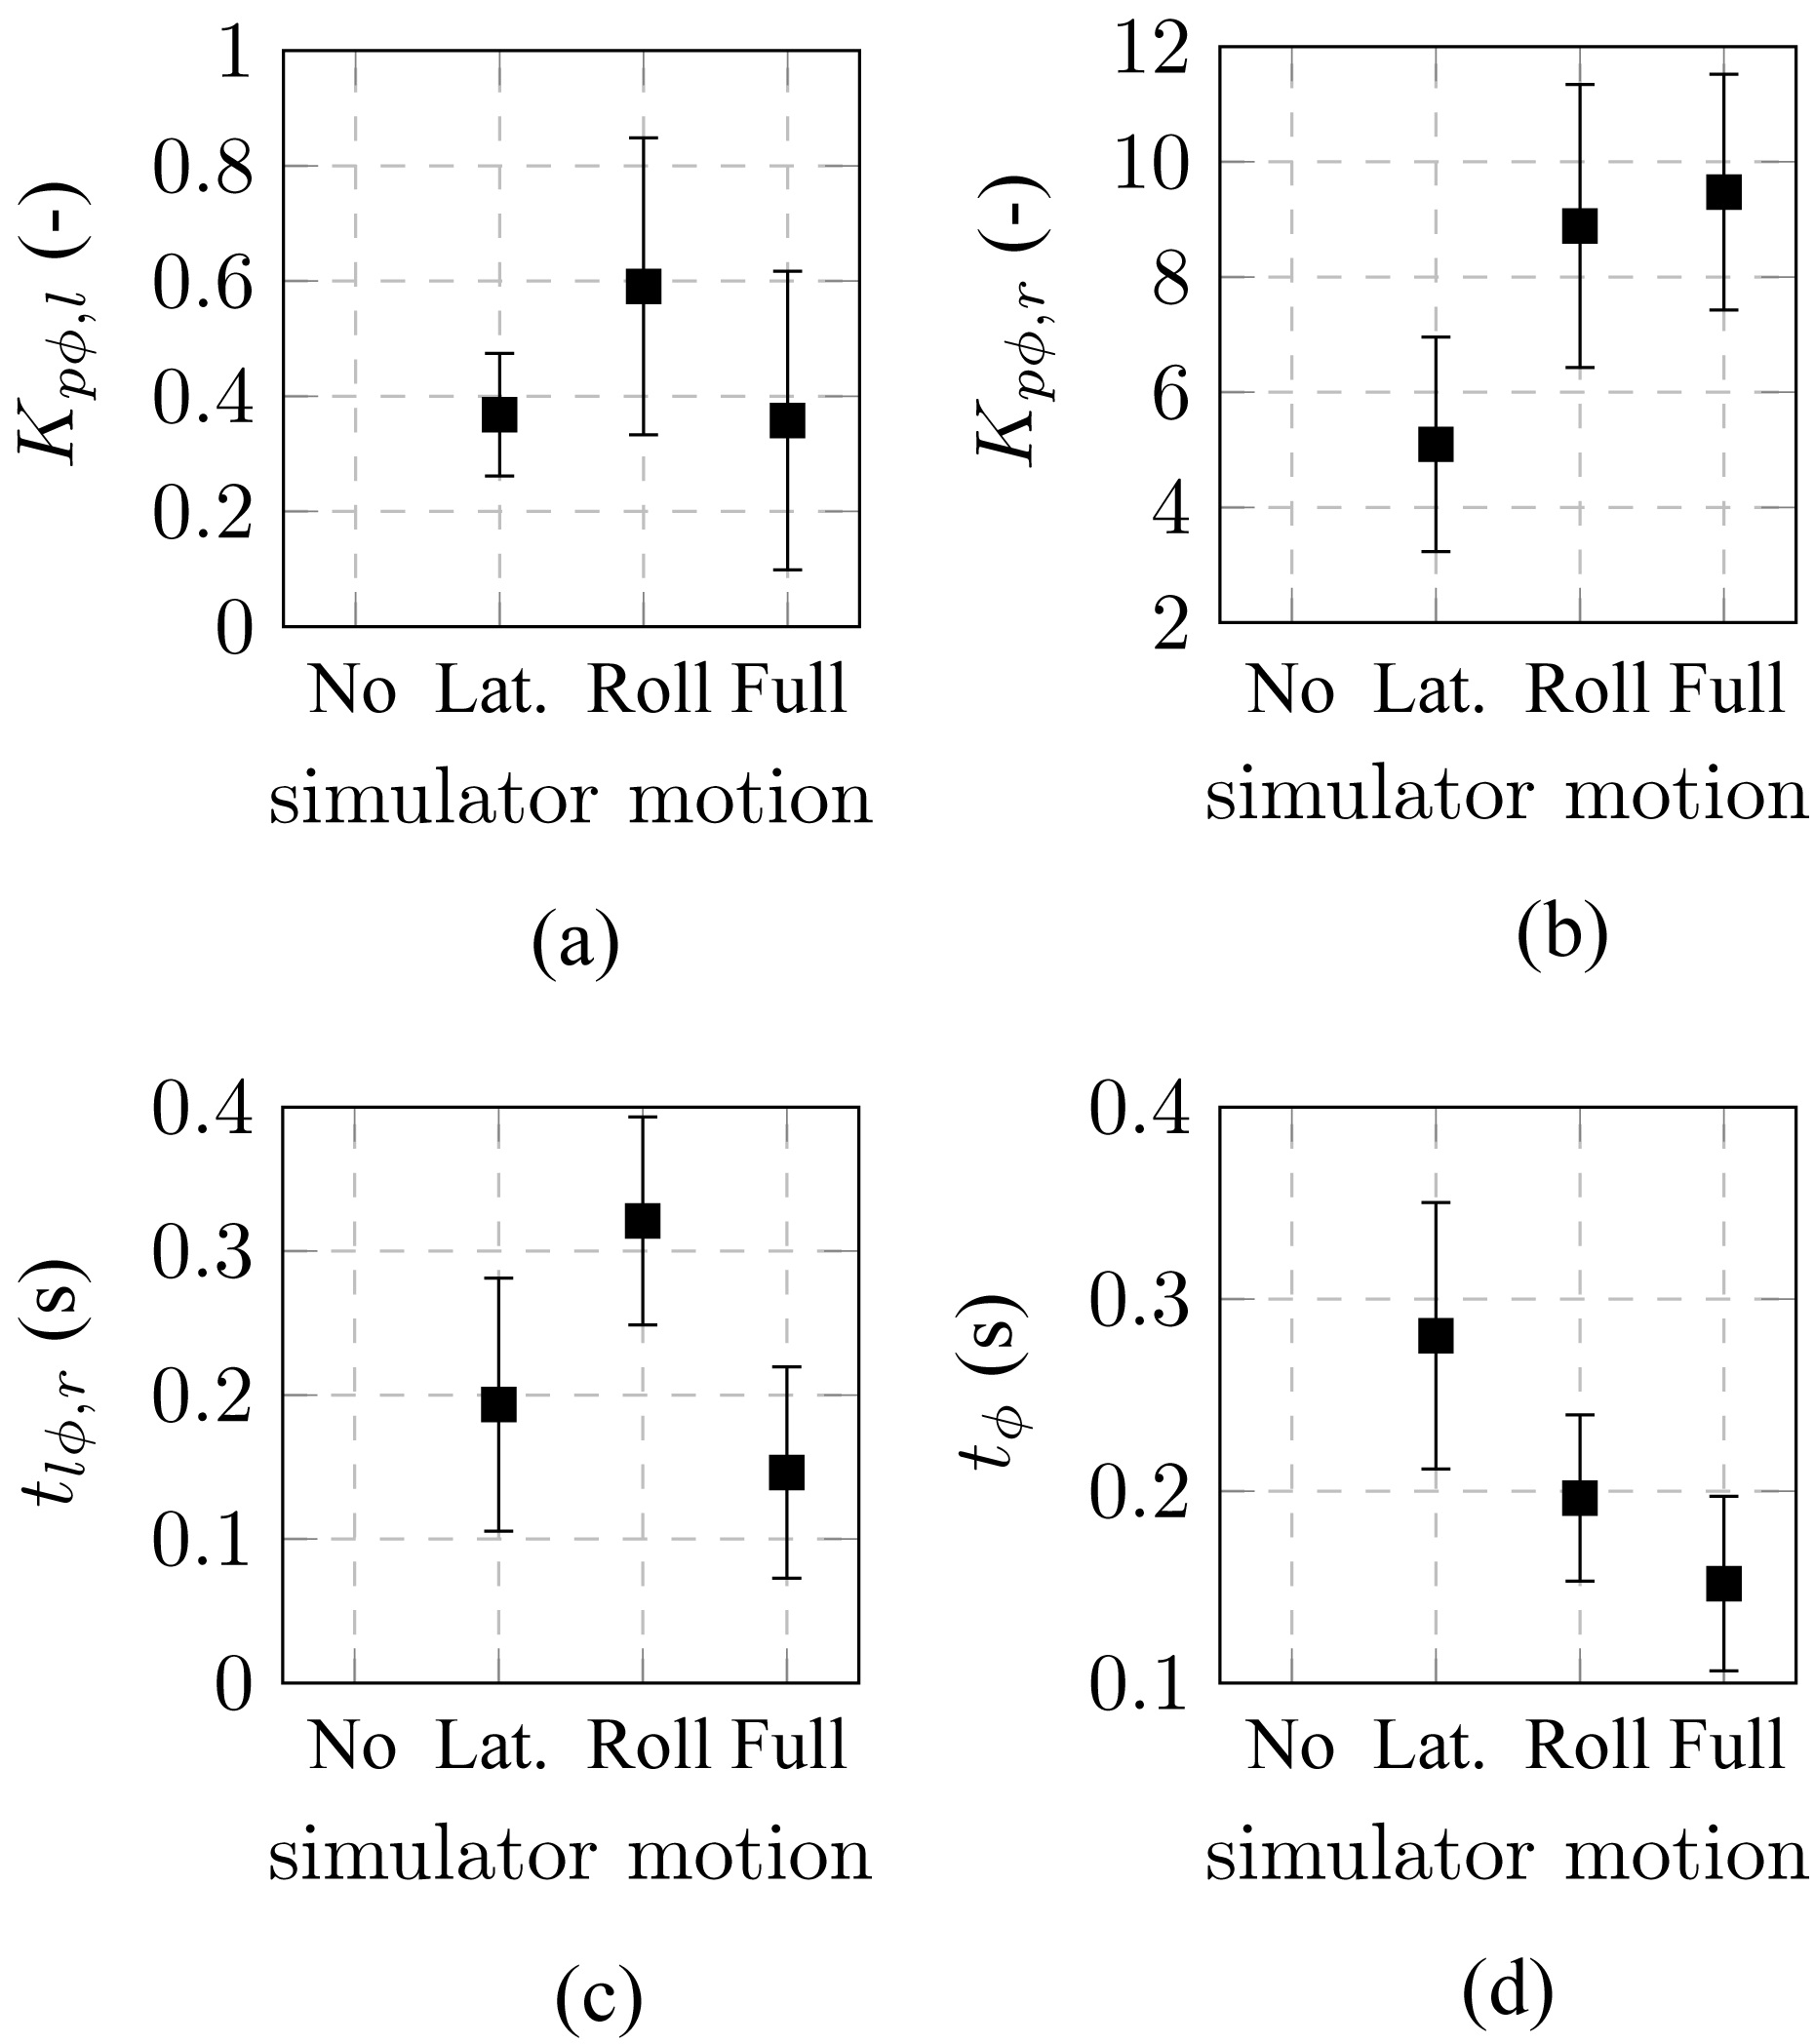 Pilot model parameters of the motion perception path. (a) Lateral motion gain, (b) roll motion gain, (c) roll motion lead, and (d) motion time delay.